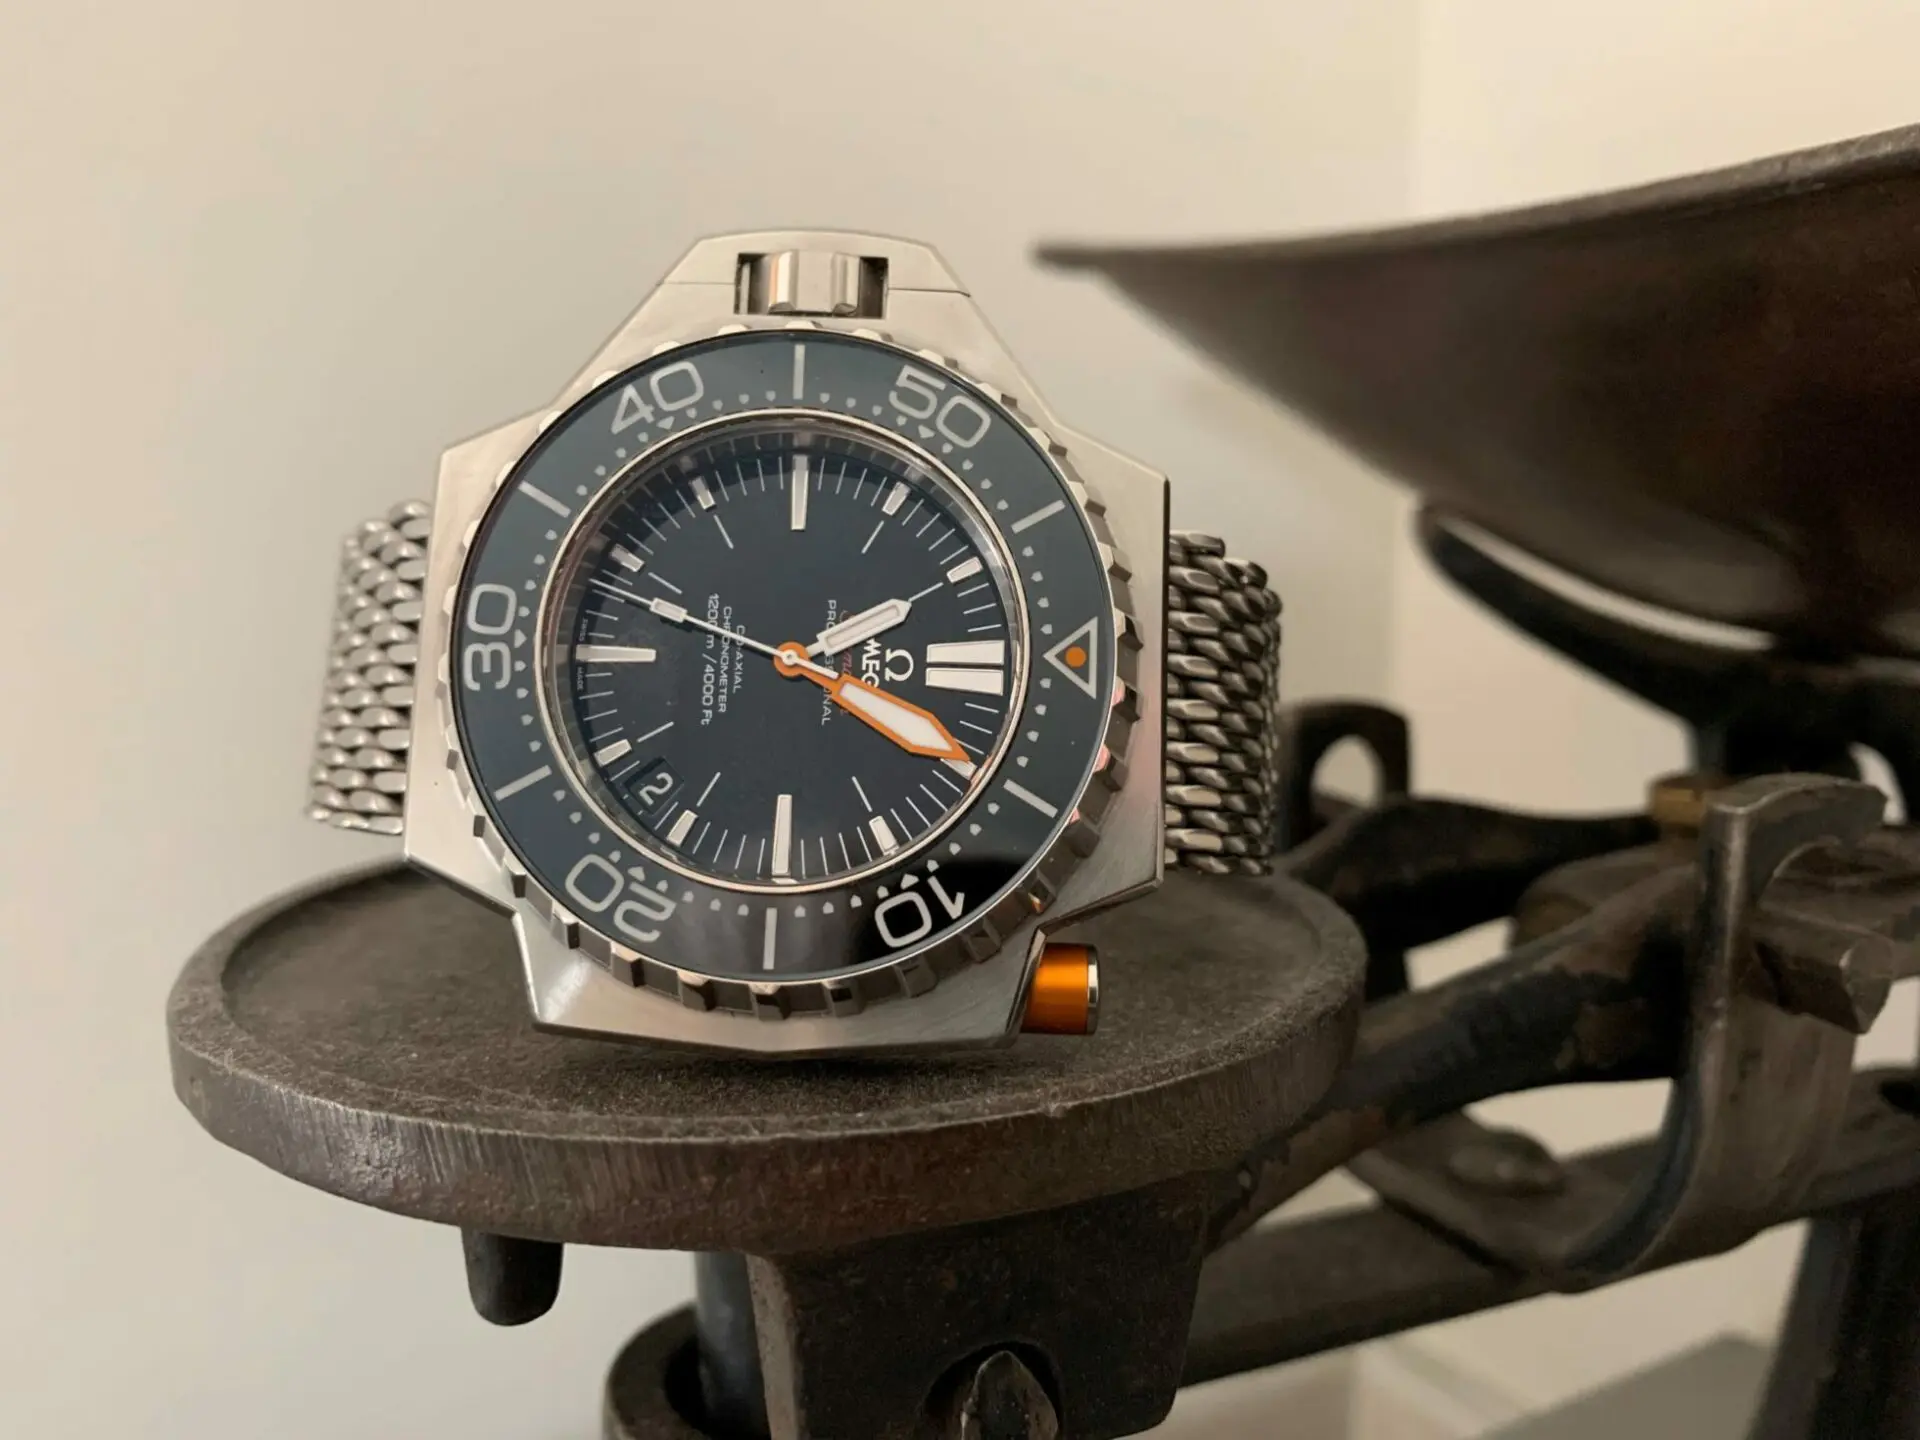 Farewell to the tooliest of tool watches, the Omega Ploprof in steel